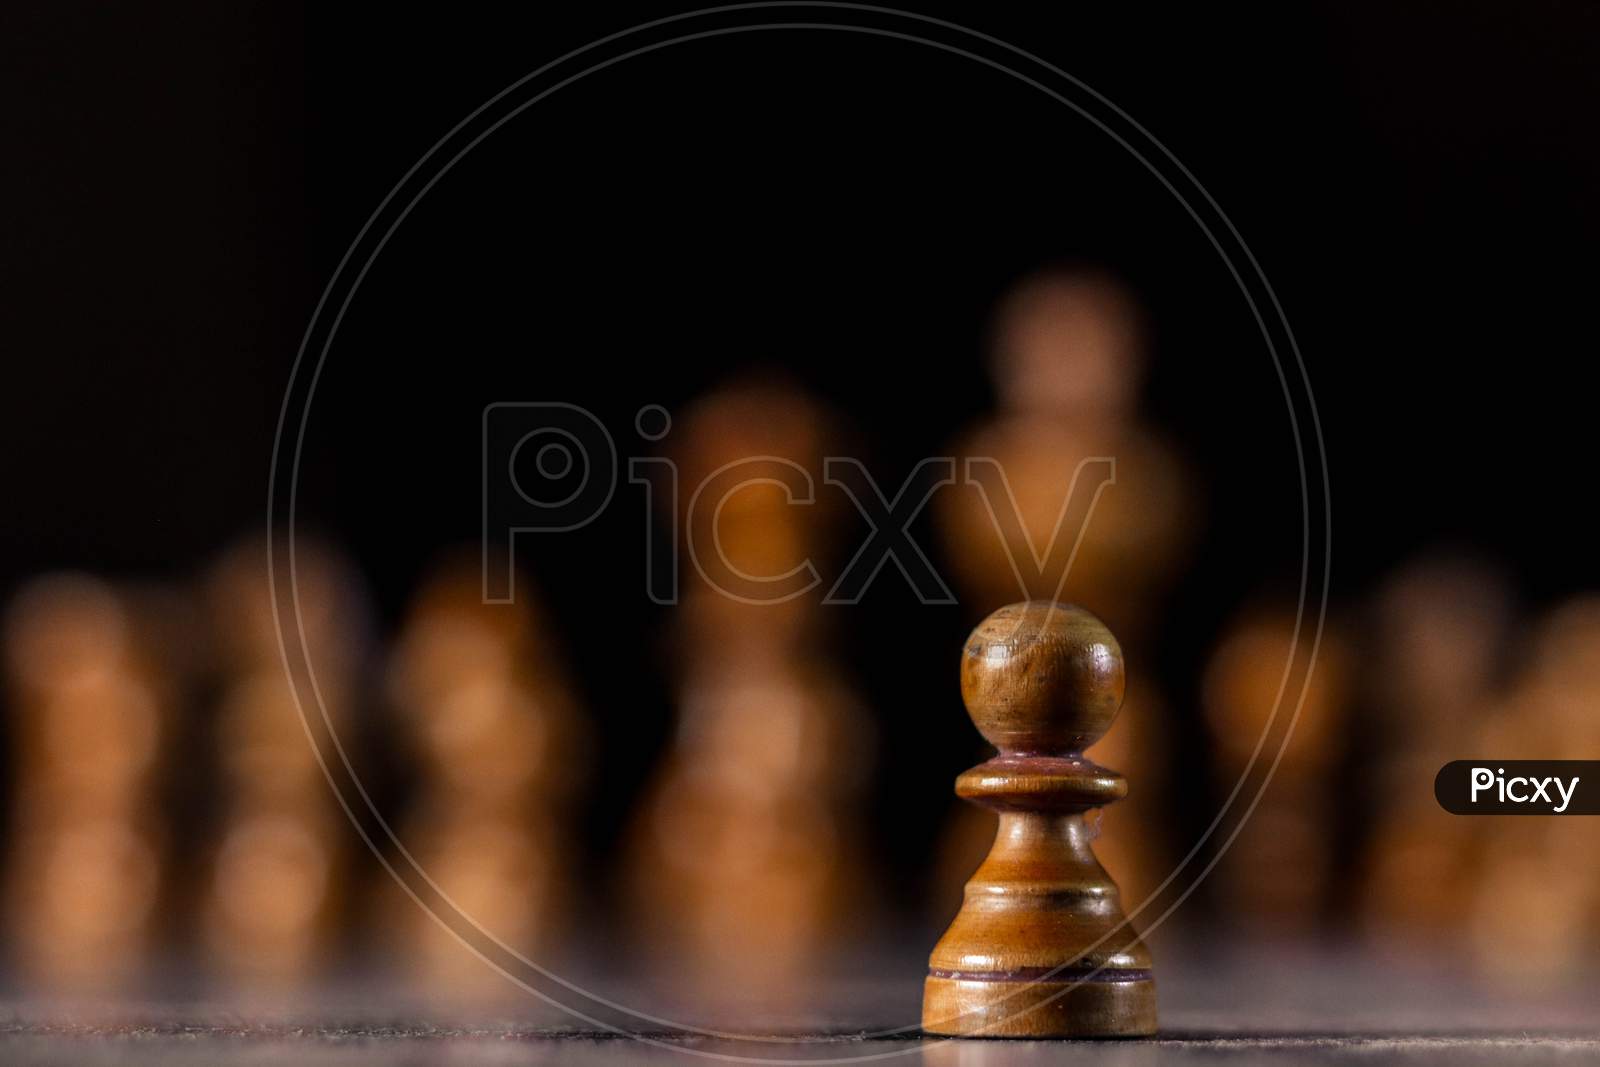 Pawn on a chess board